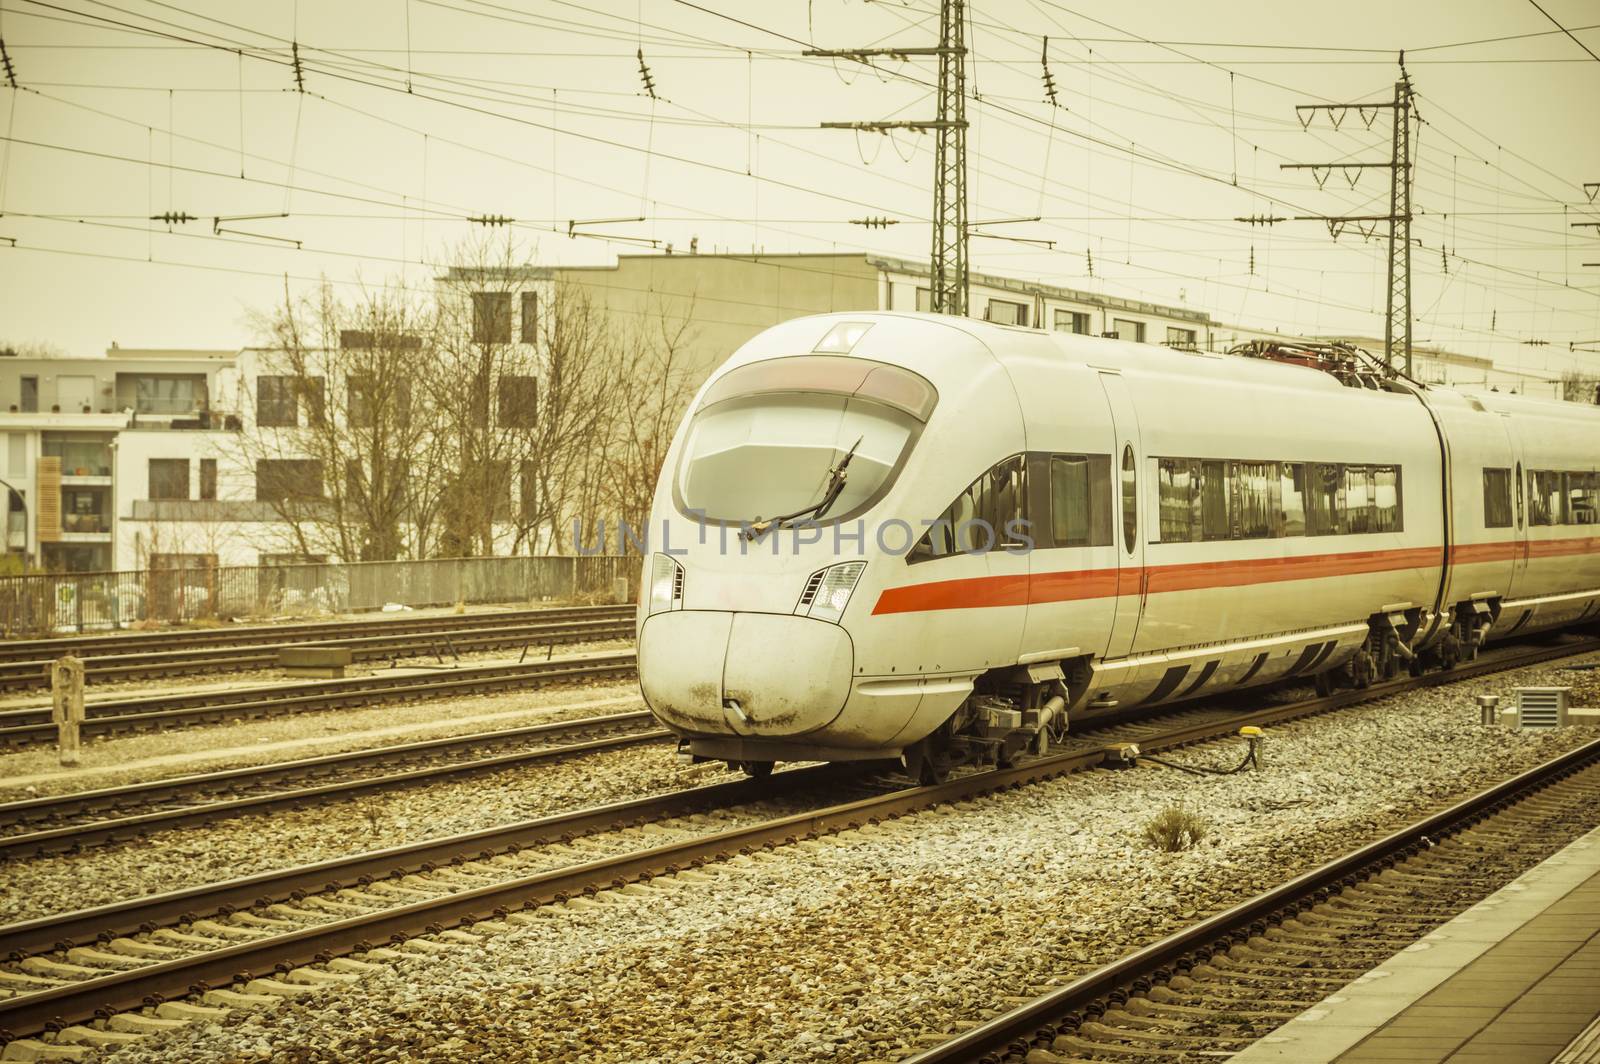 Image with a gray  intercity train, modern and high speed public transportation, arriving in the station